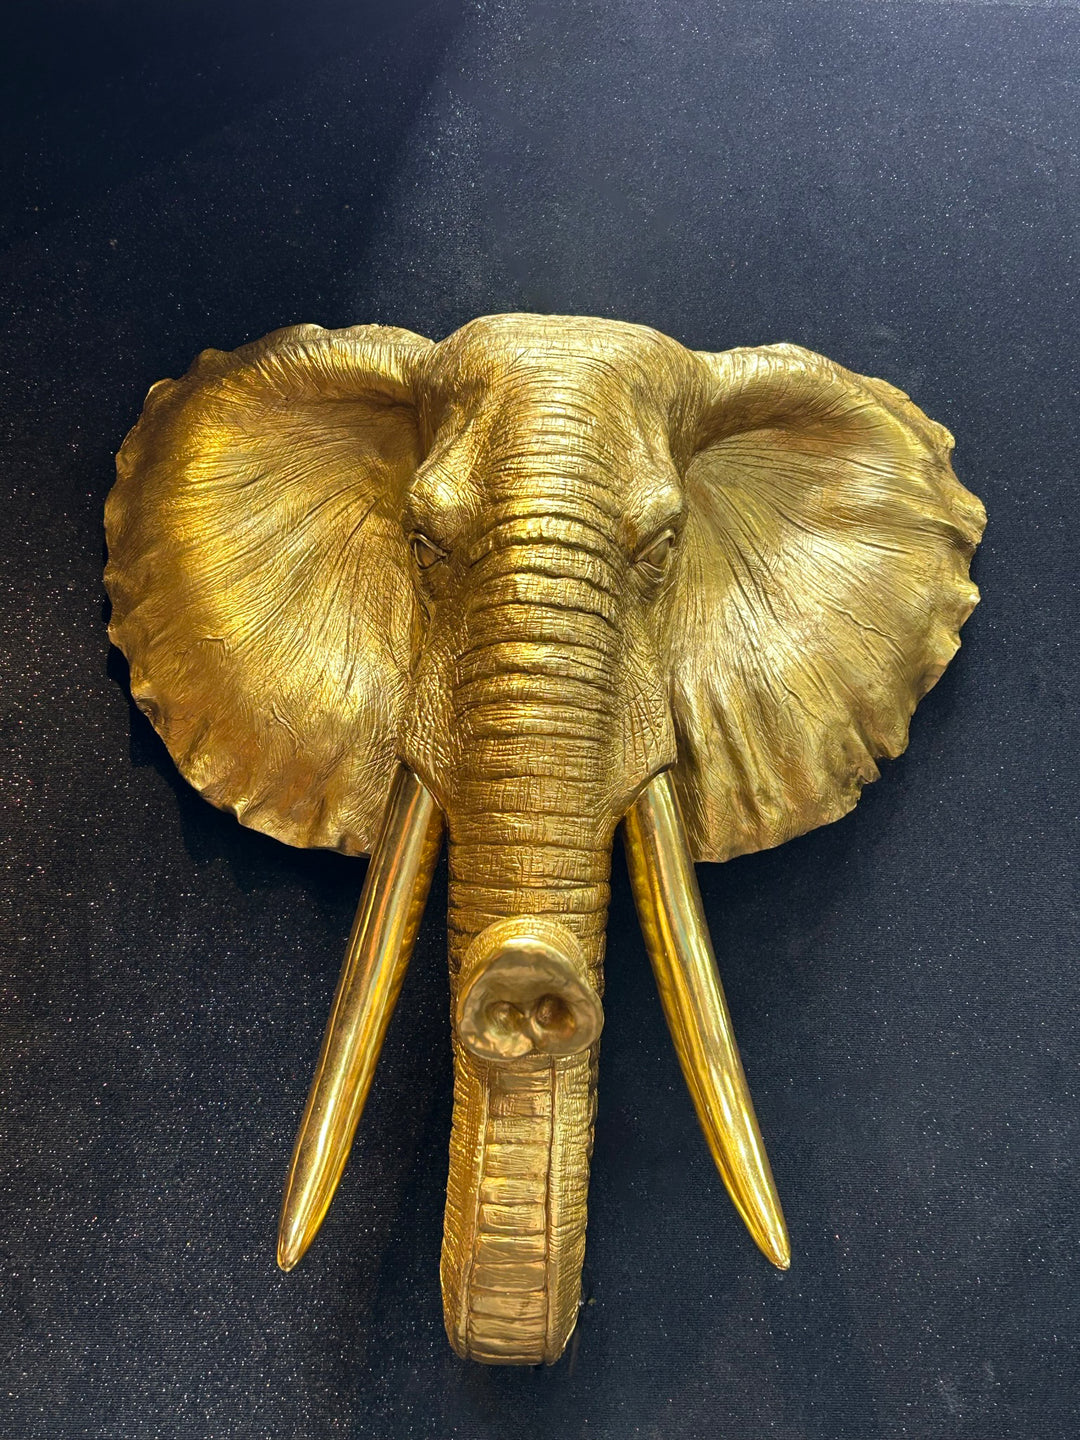 Large Gold Elephant With Trunk Up, An Upward-Pointing Elephant Trunk, Wall Mounted Elephant Head, 75cm